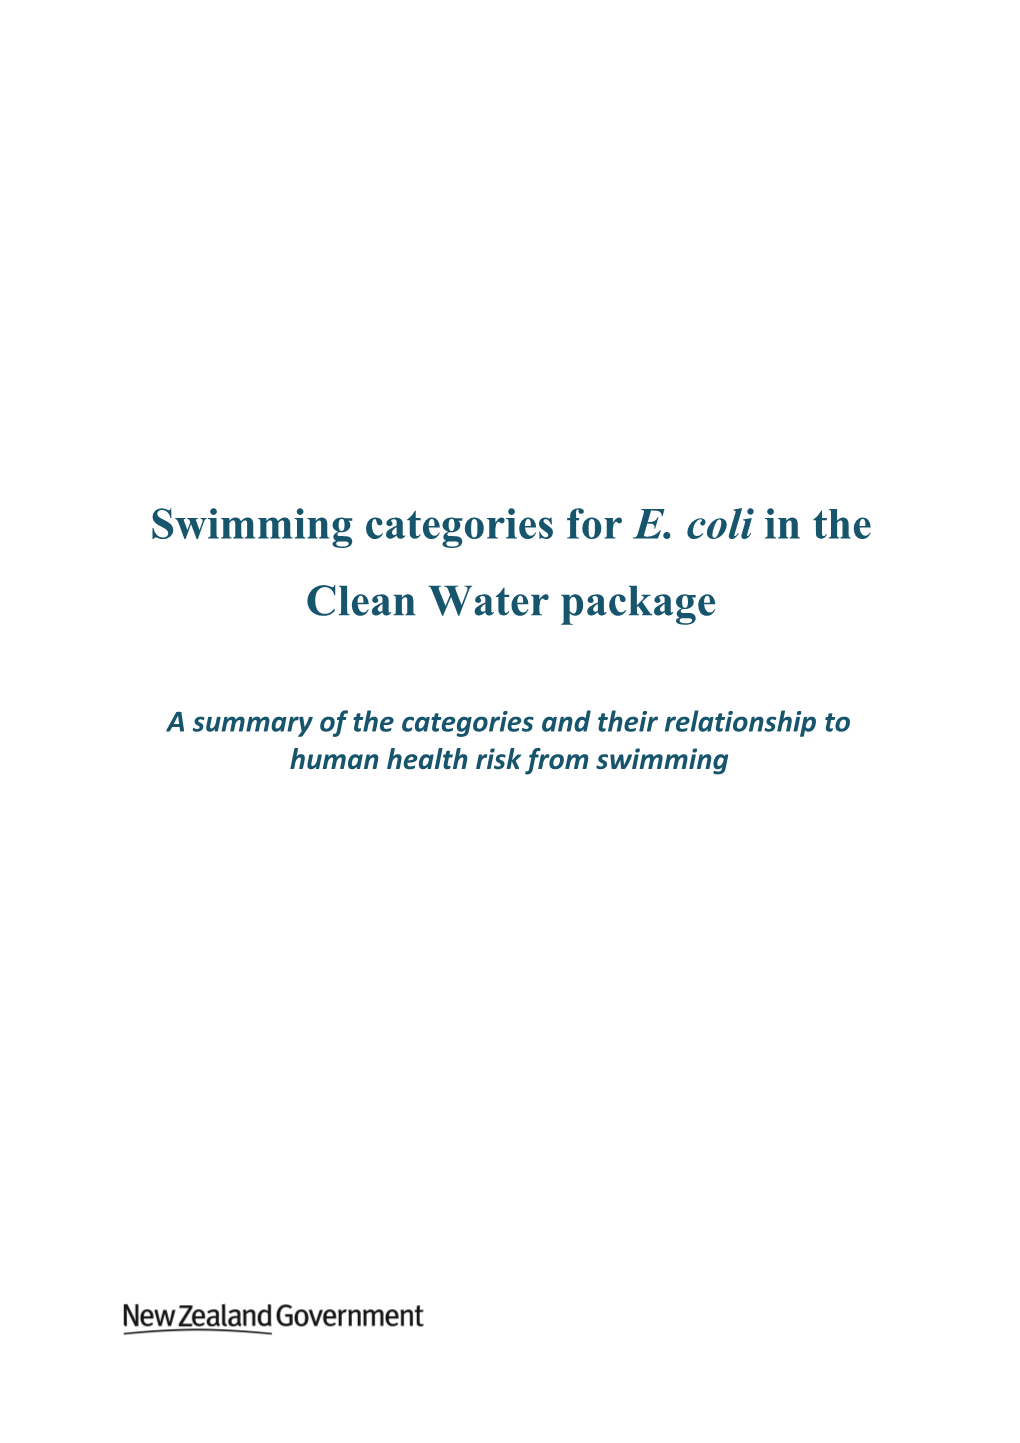 Swimming Categories for E. Coli in the Clean Water Package